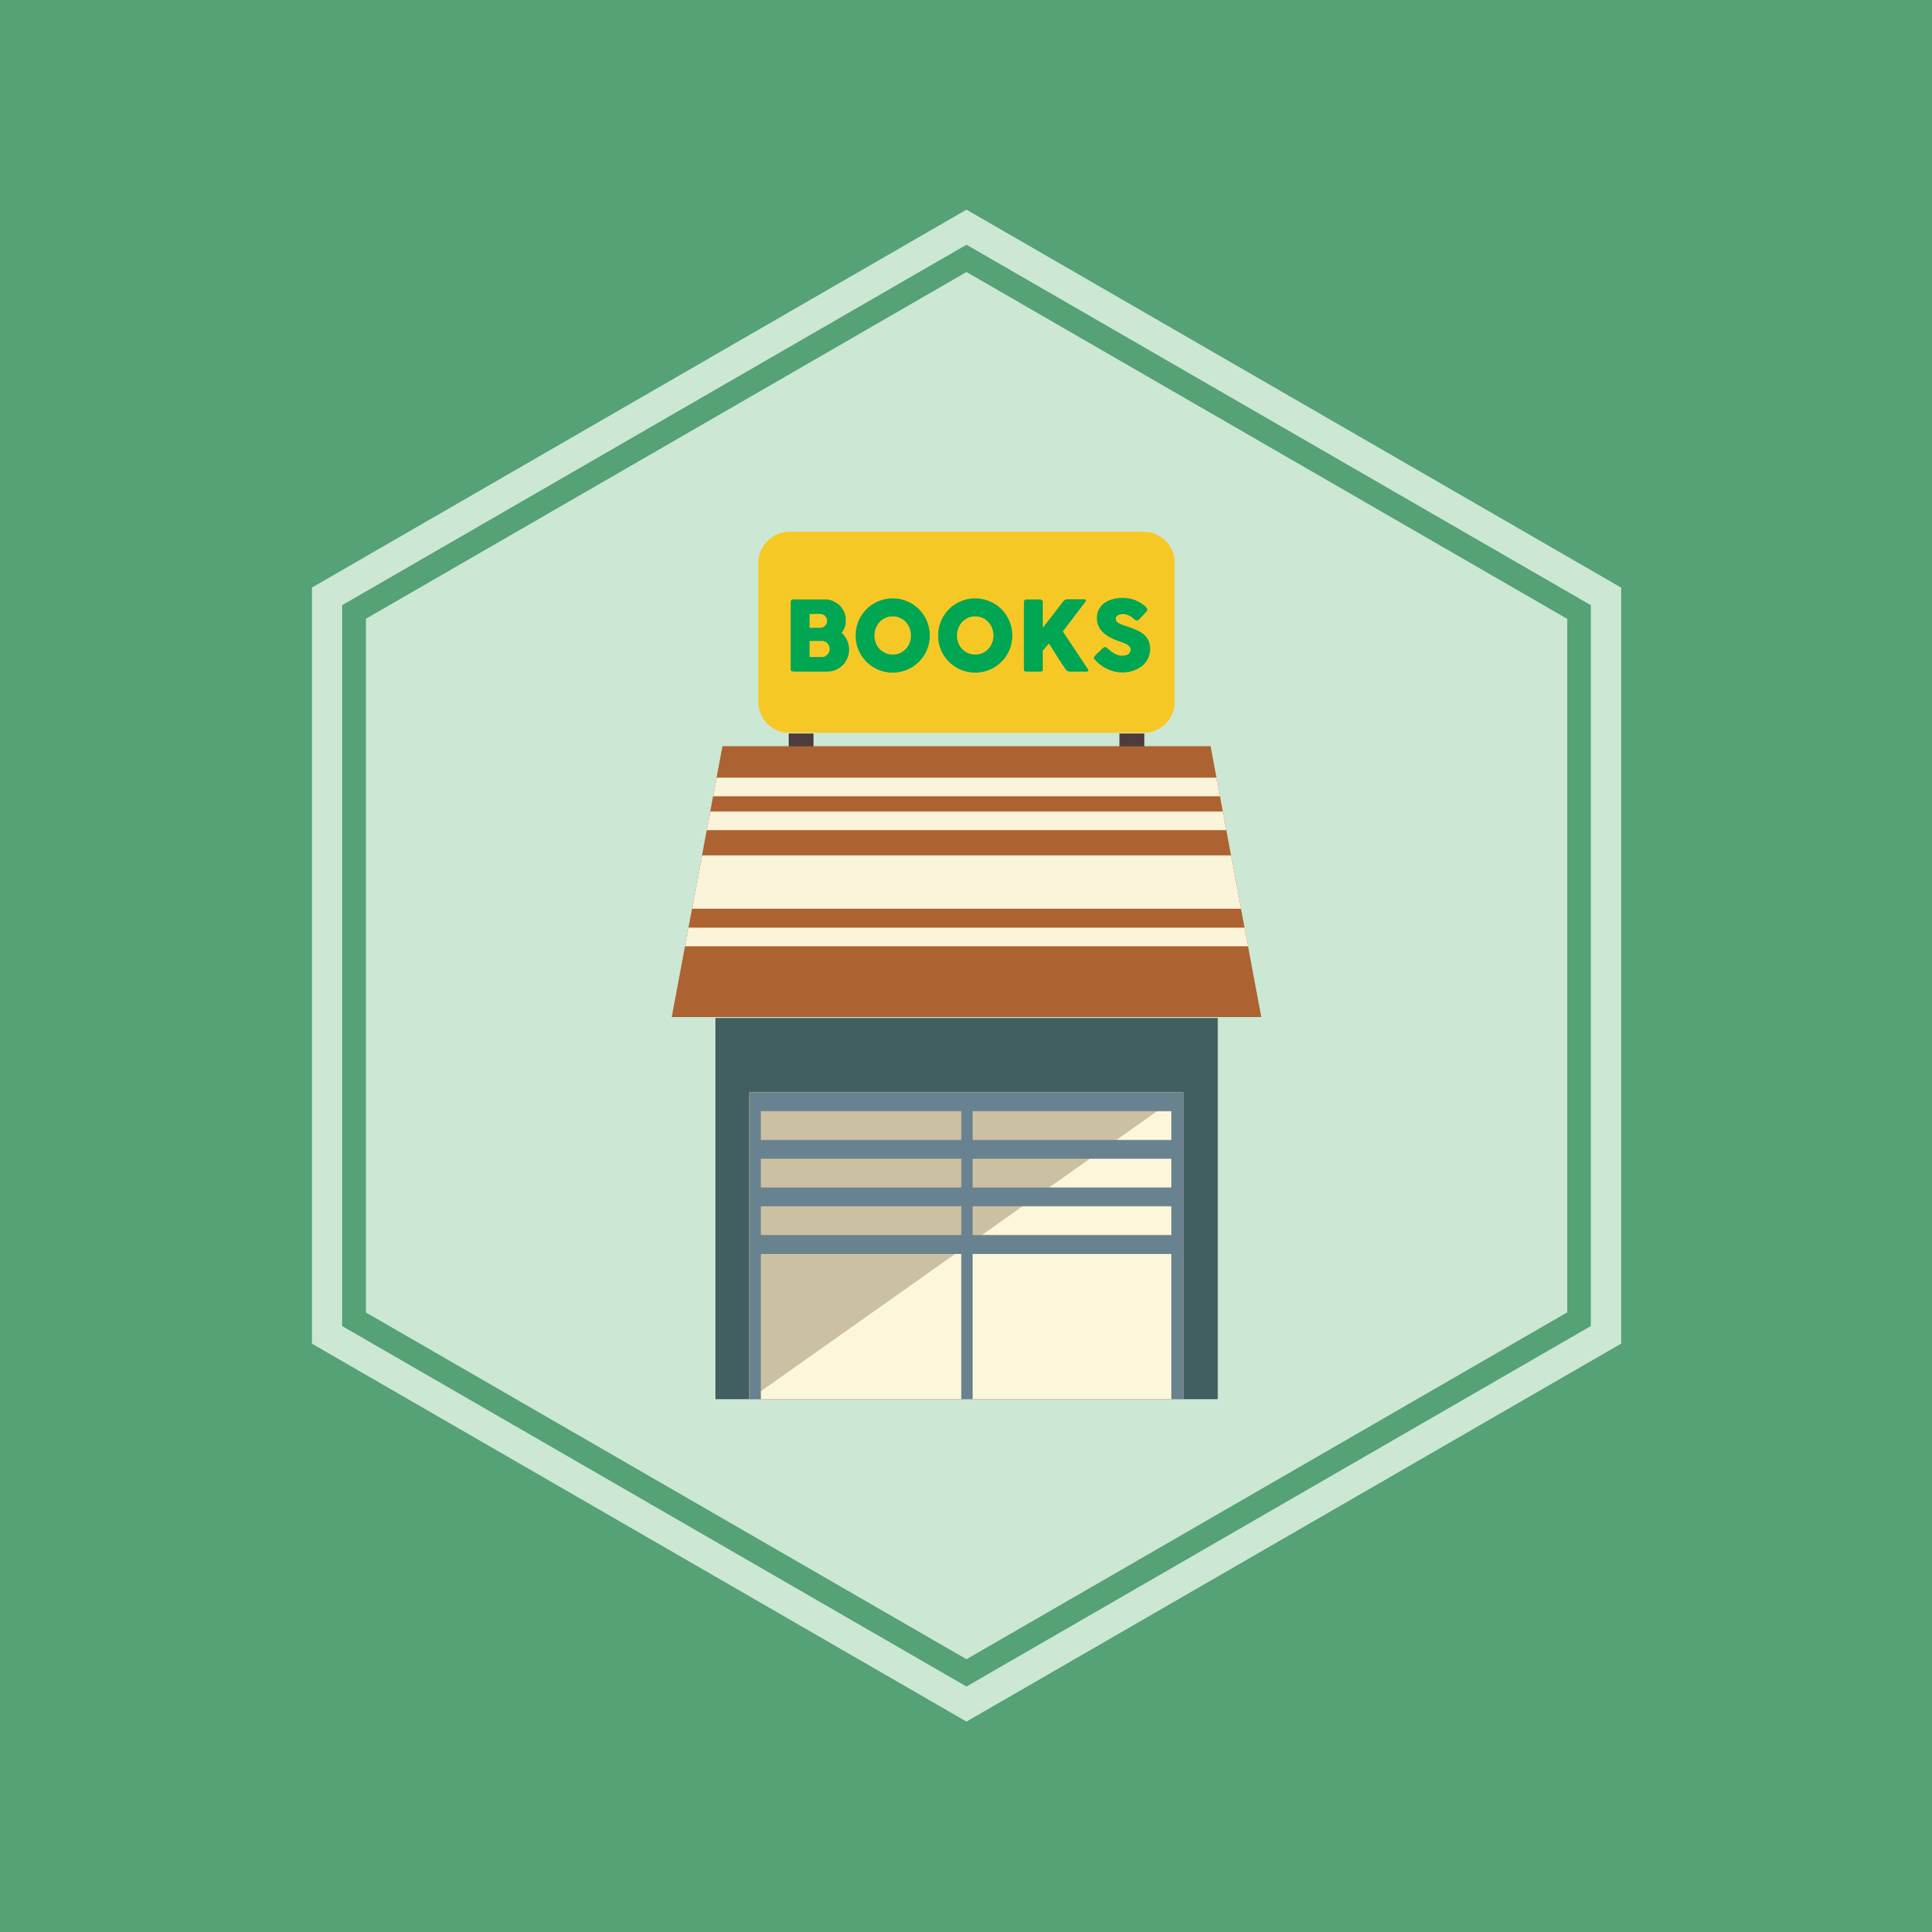 Plans to Start Up a Bookstore Business